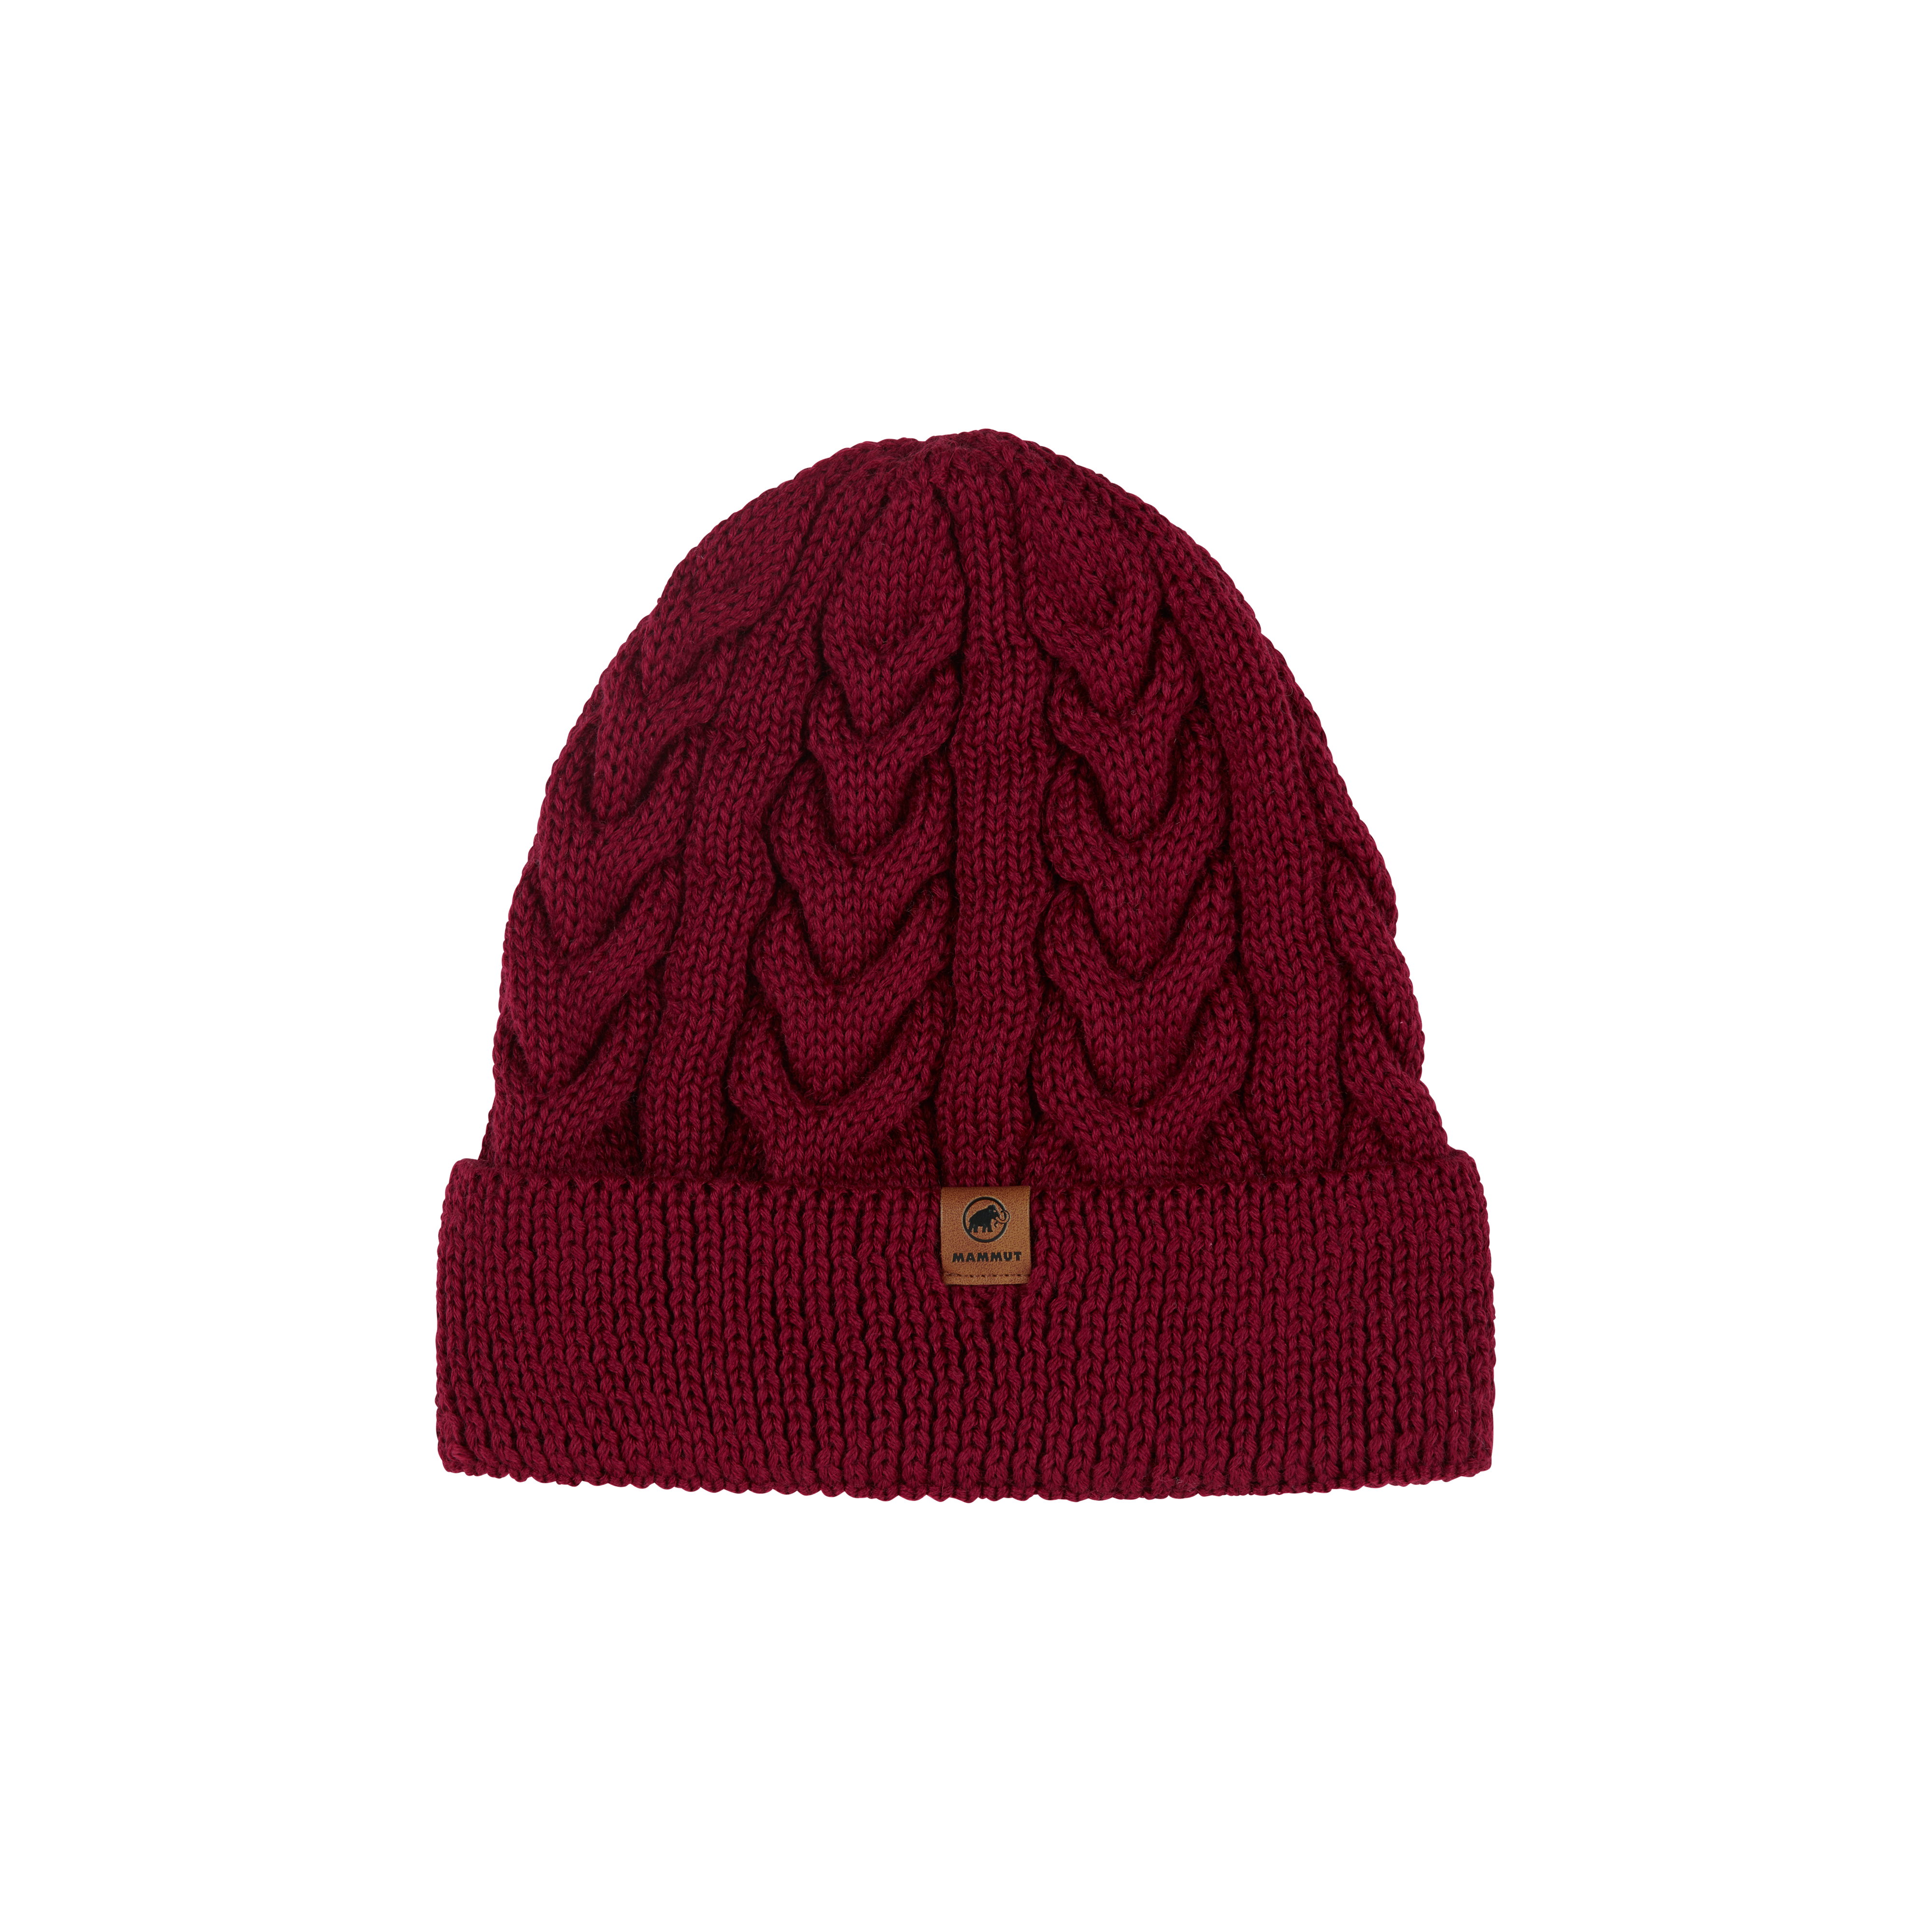 Valbella Beanie - blood red, one size thumbnail